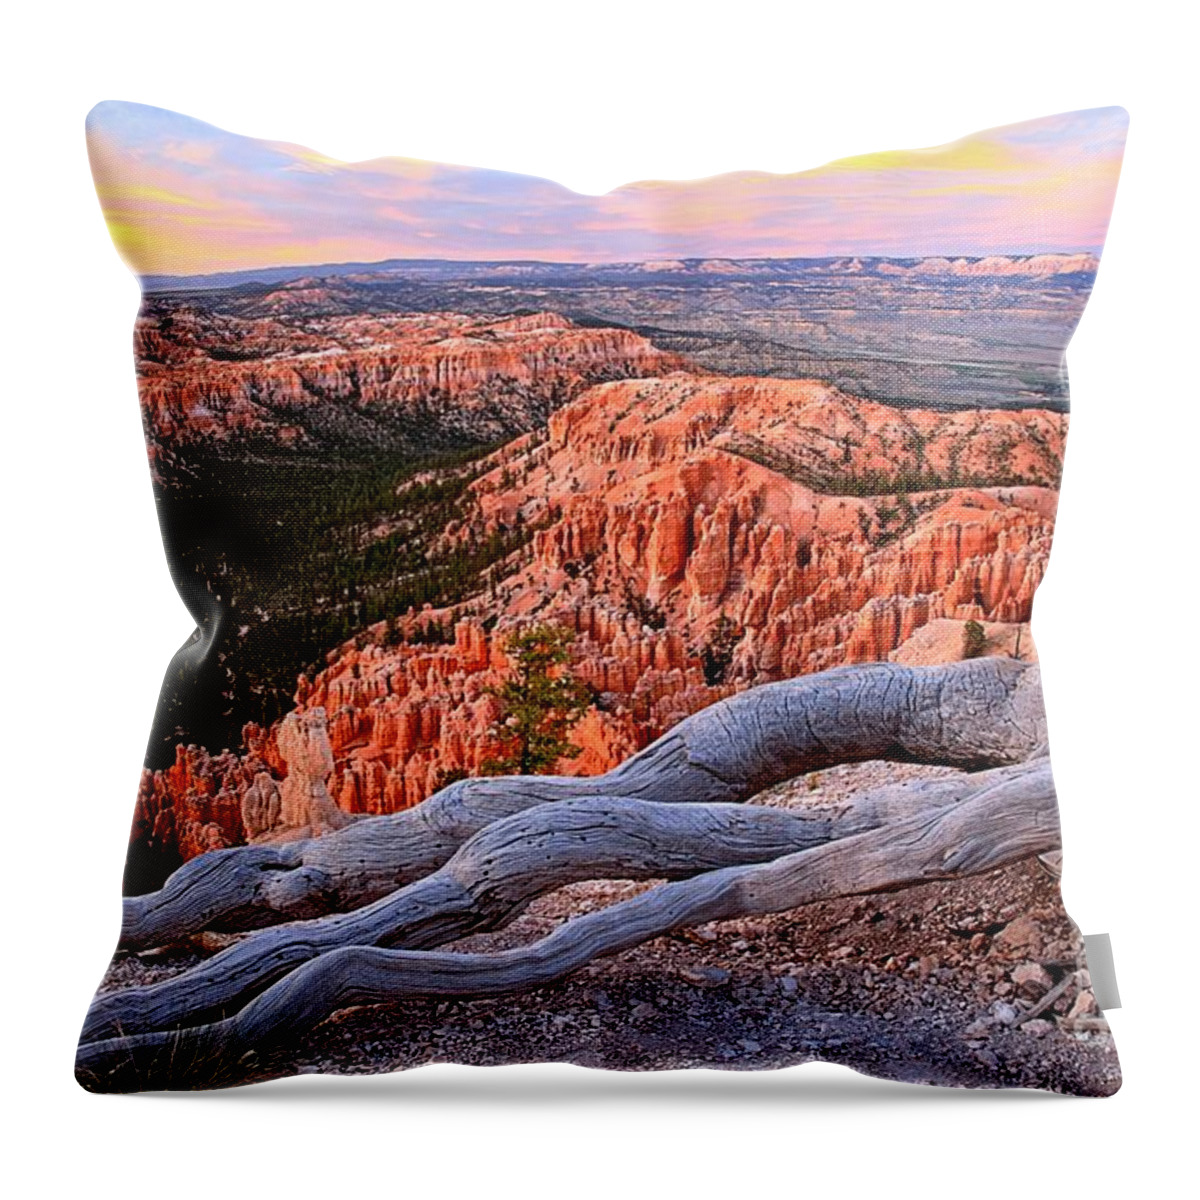 Bryce Canyon Throw Pillow featuring the photograph Hoodoos In The Canyon by Adam Jewell